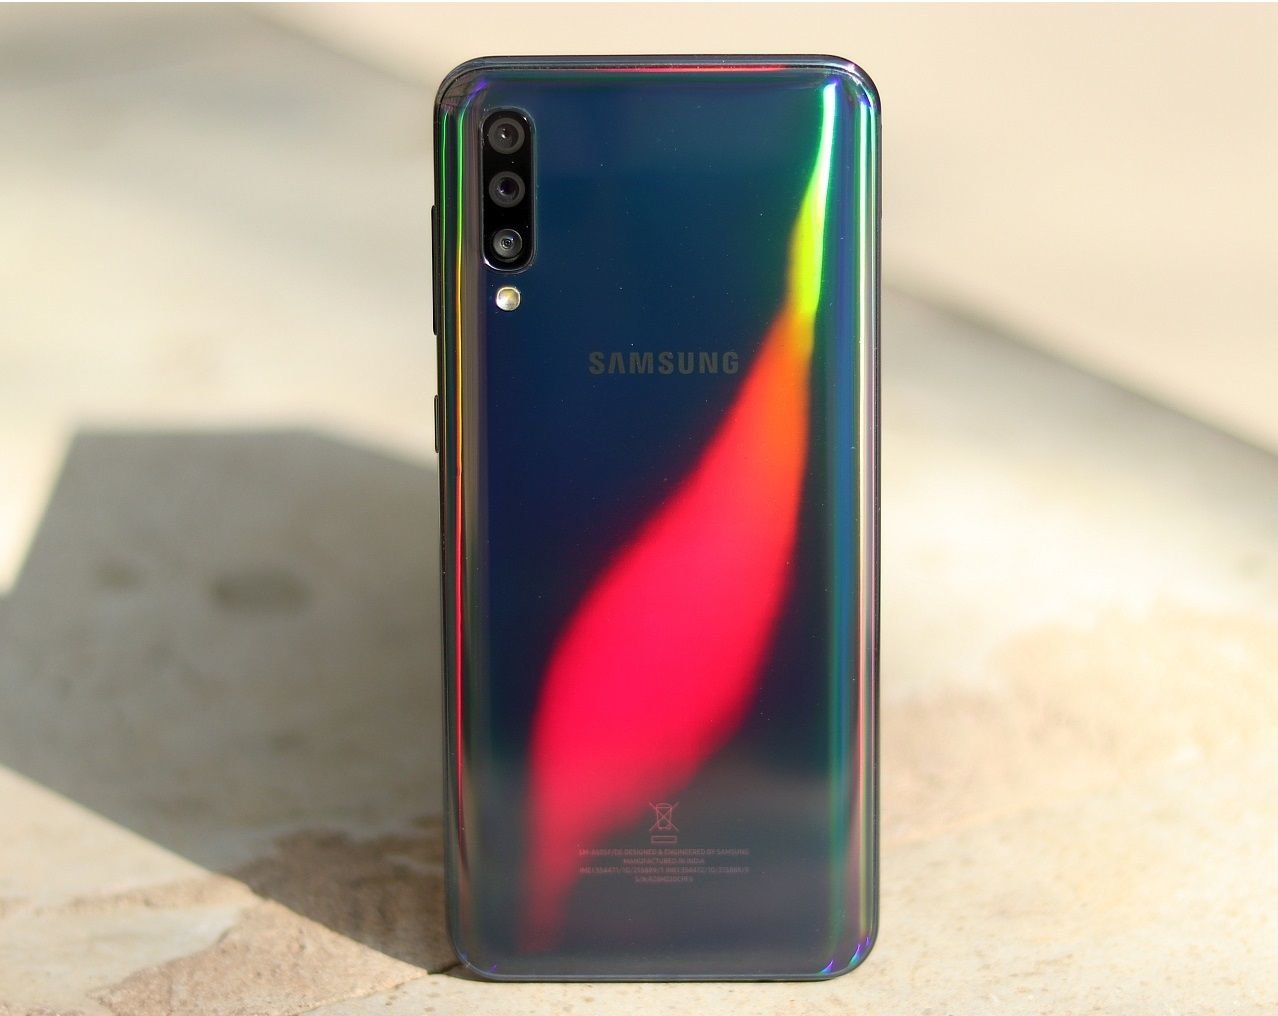 Samsung Galaxy A50 Android update